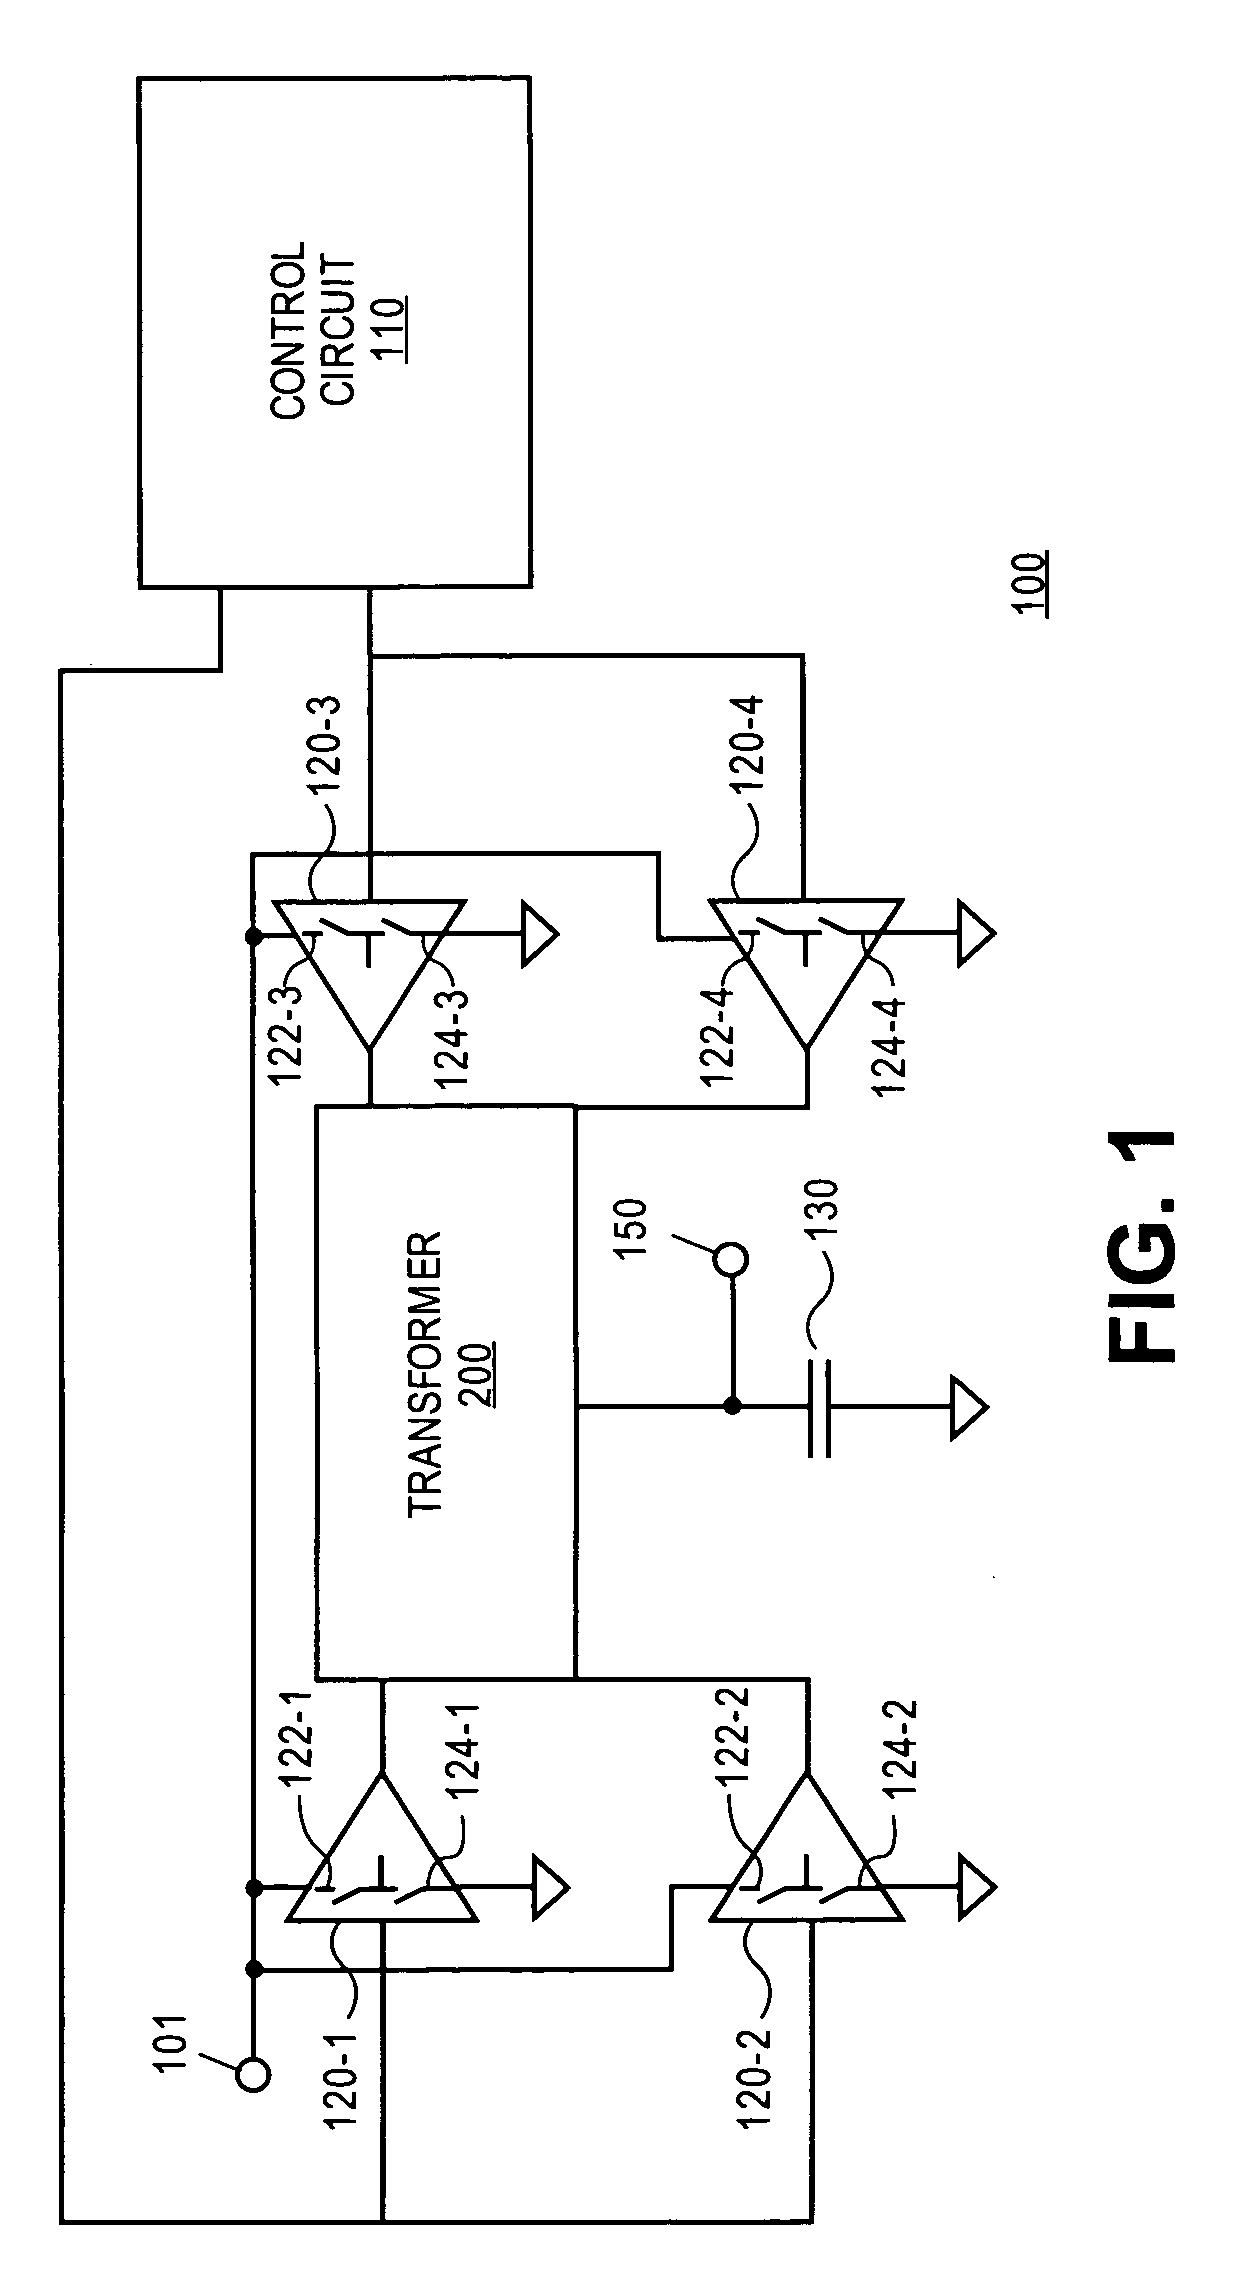 Apparatus and method for multi-phase transformers